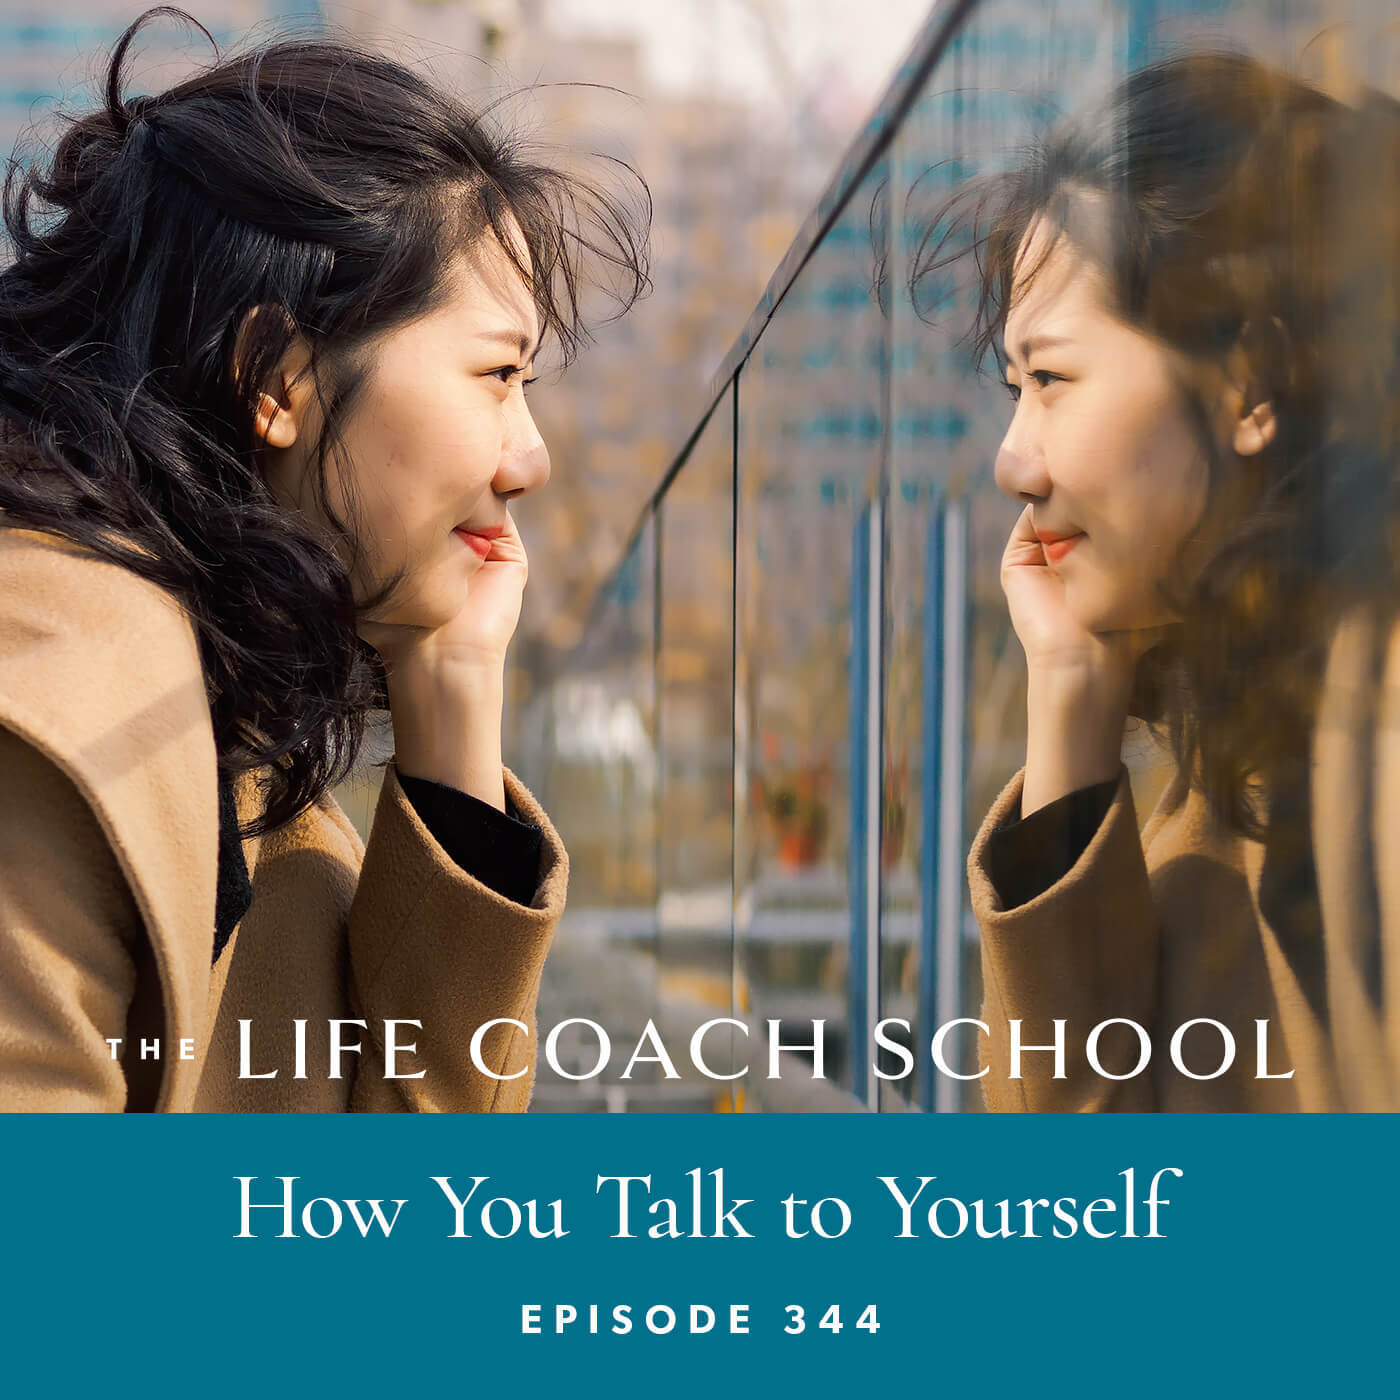 The Life Coach School Podcast with Brooke Castillo | Episode 344 | How You Talk to Yourself